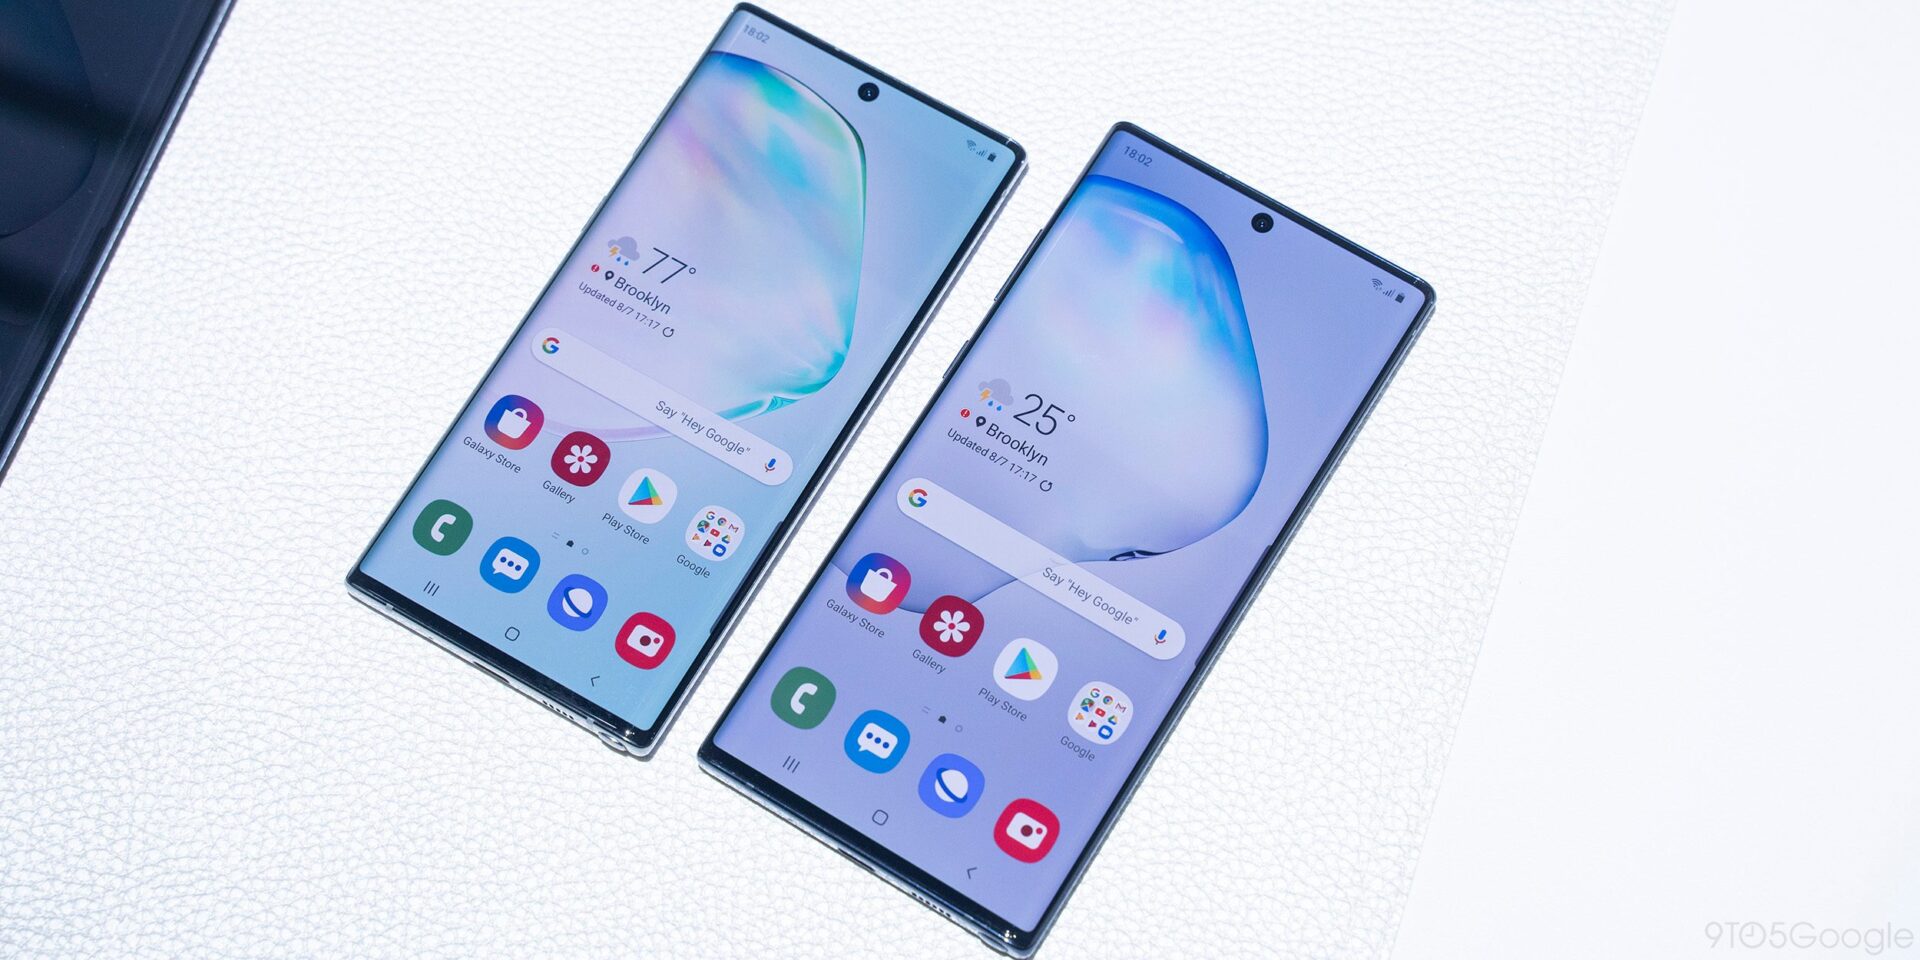 Samsung Galaxy Note10 series launched: Display, Design, Specifications, Price & Availability